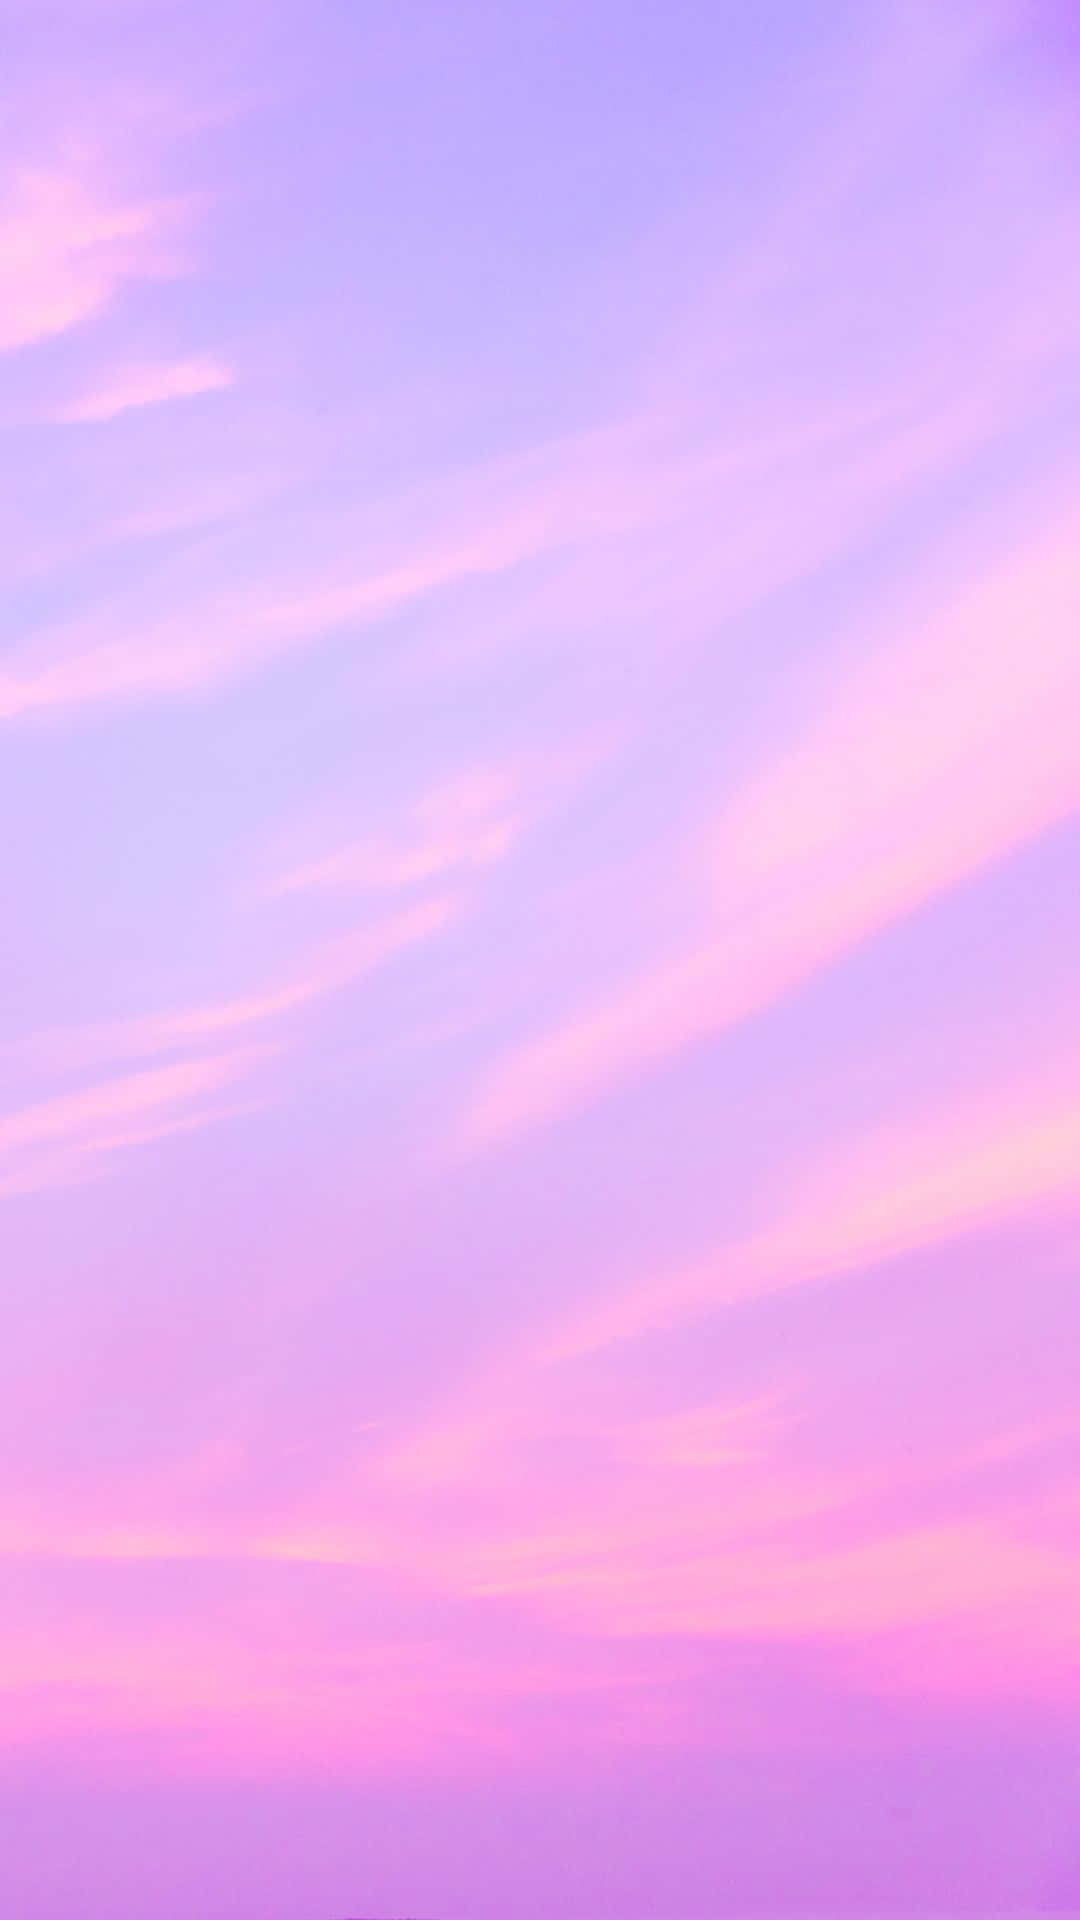 Get your hands on this stylish pink phone background now